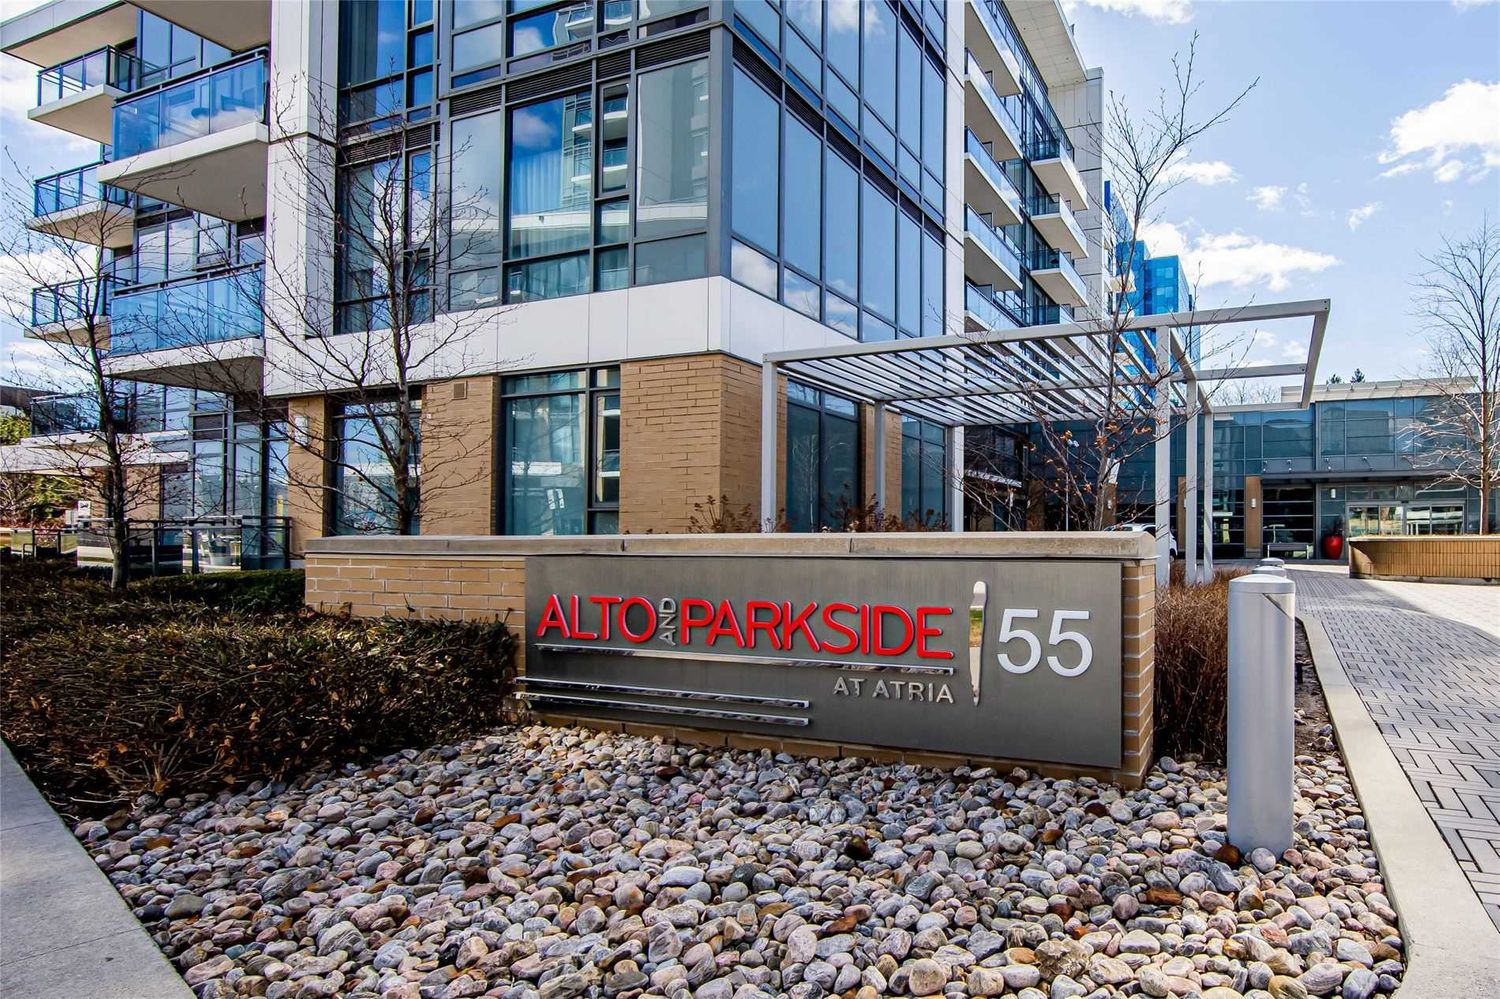 55 Ann O'Reilly Road. Alto and Parkside at Atria is located in  North York, Toronto - image #2 of 3